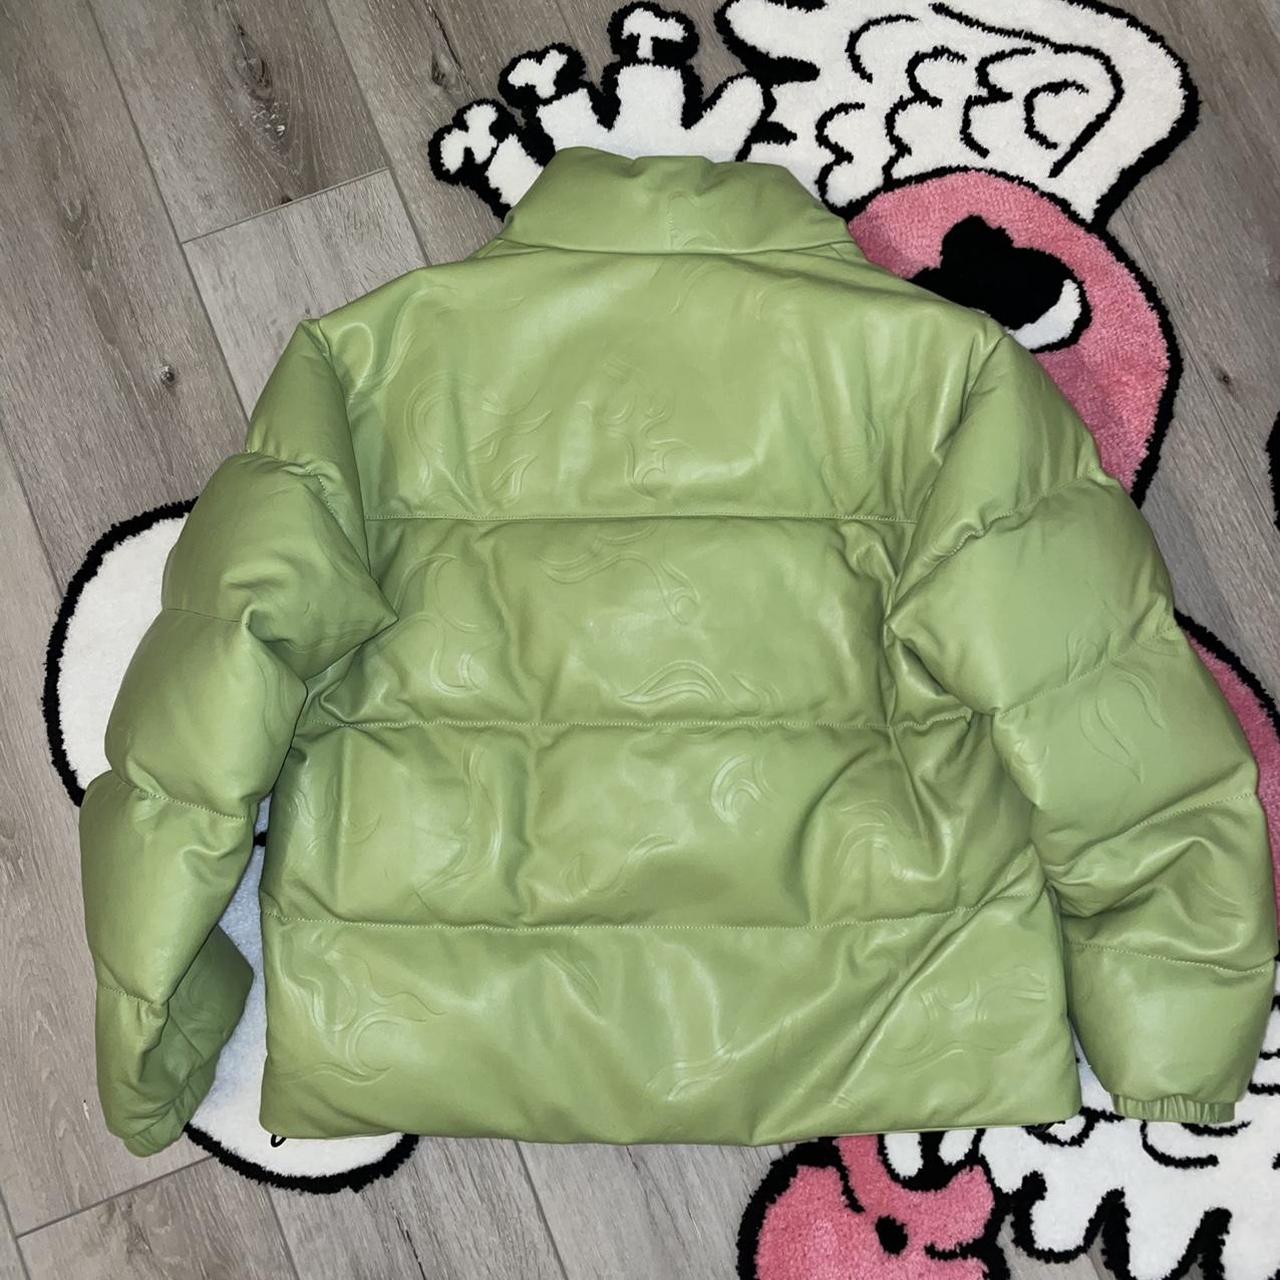 Golf Wang leather flame embossed puffer jacket